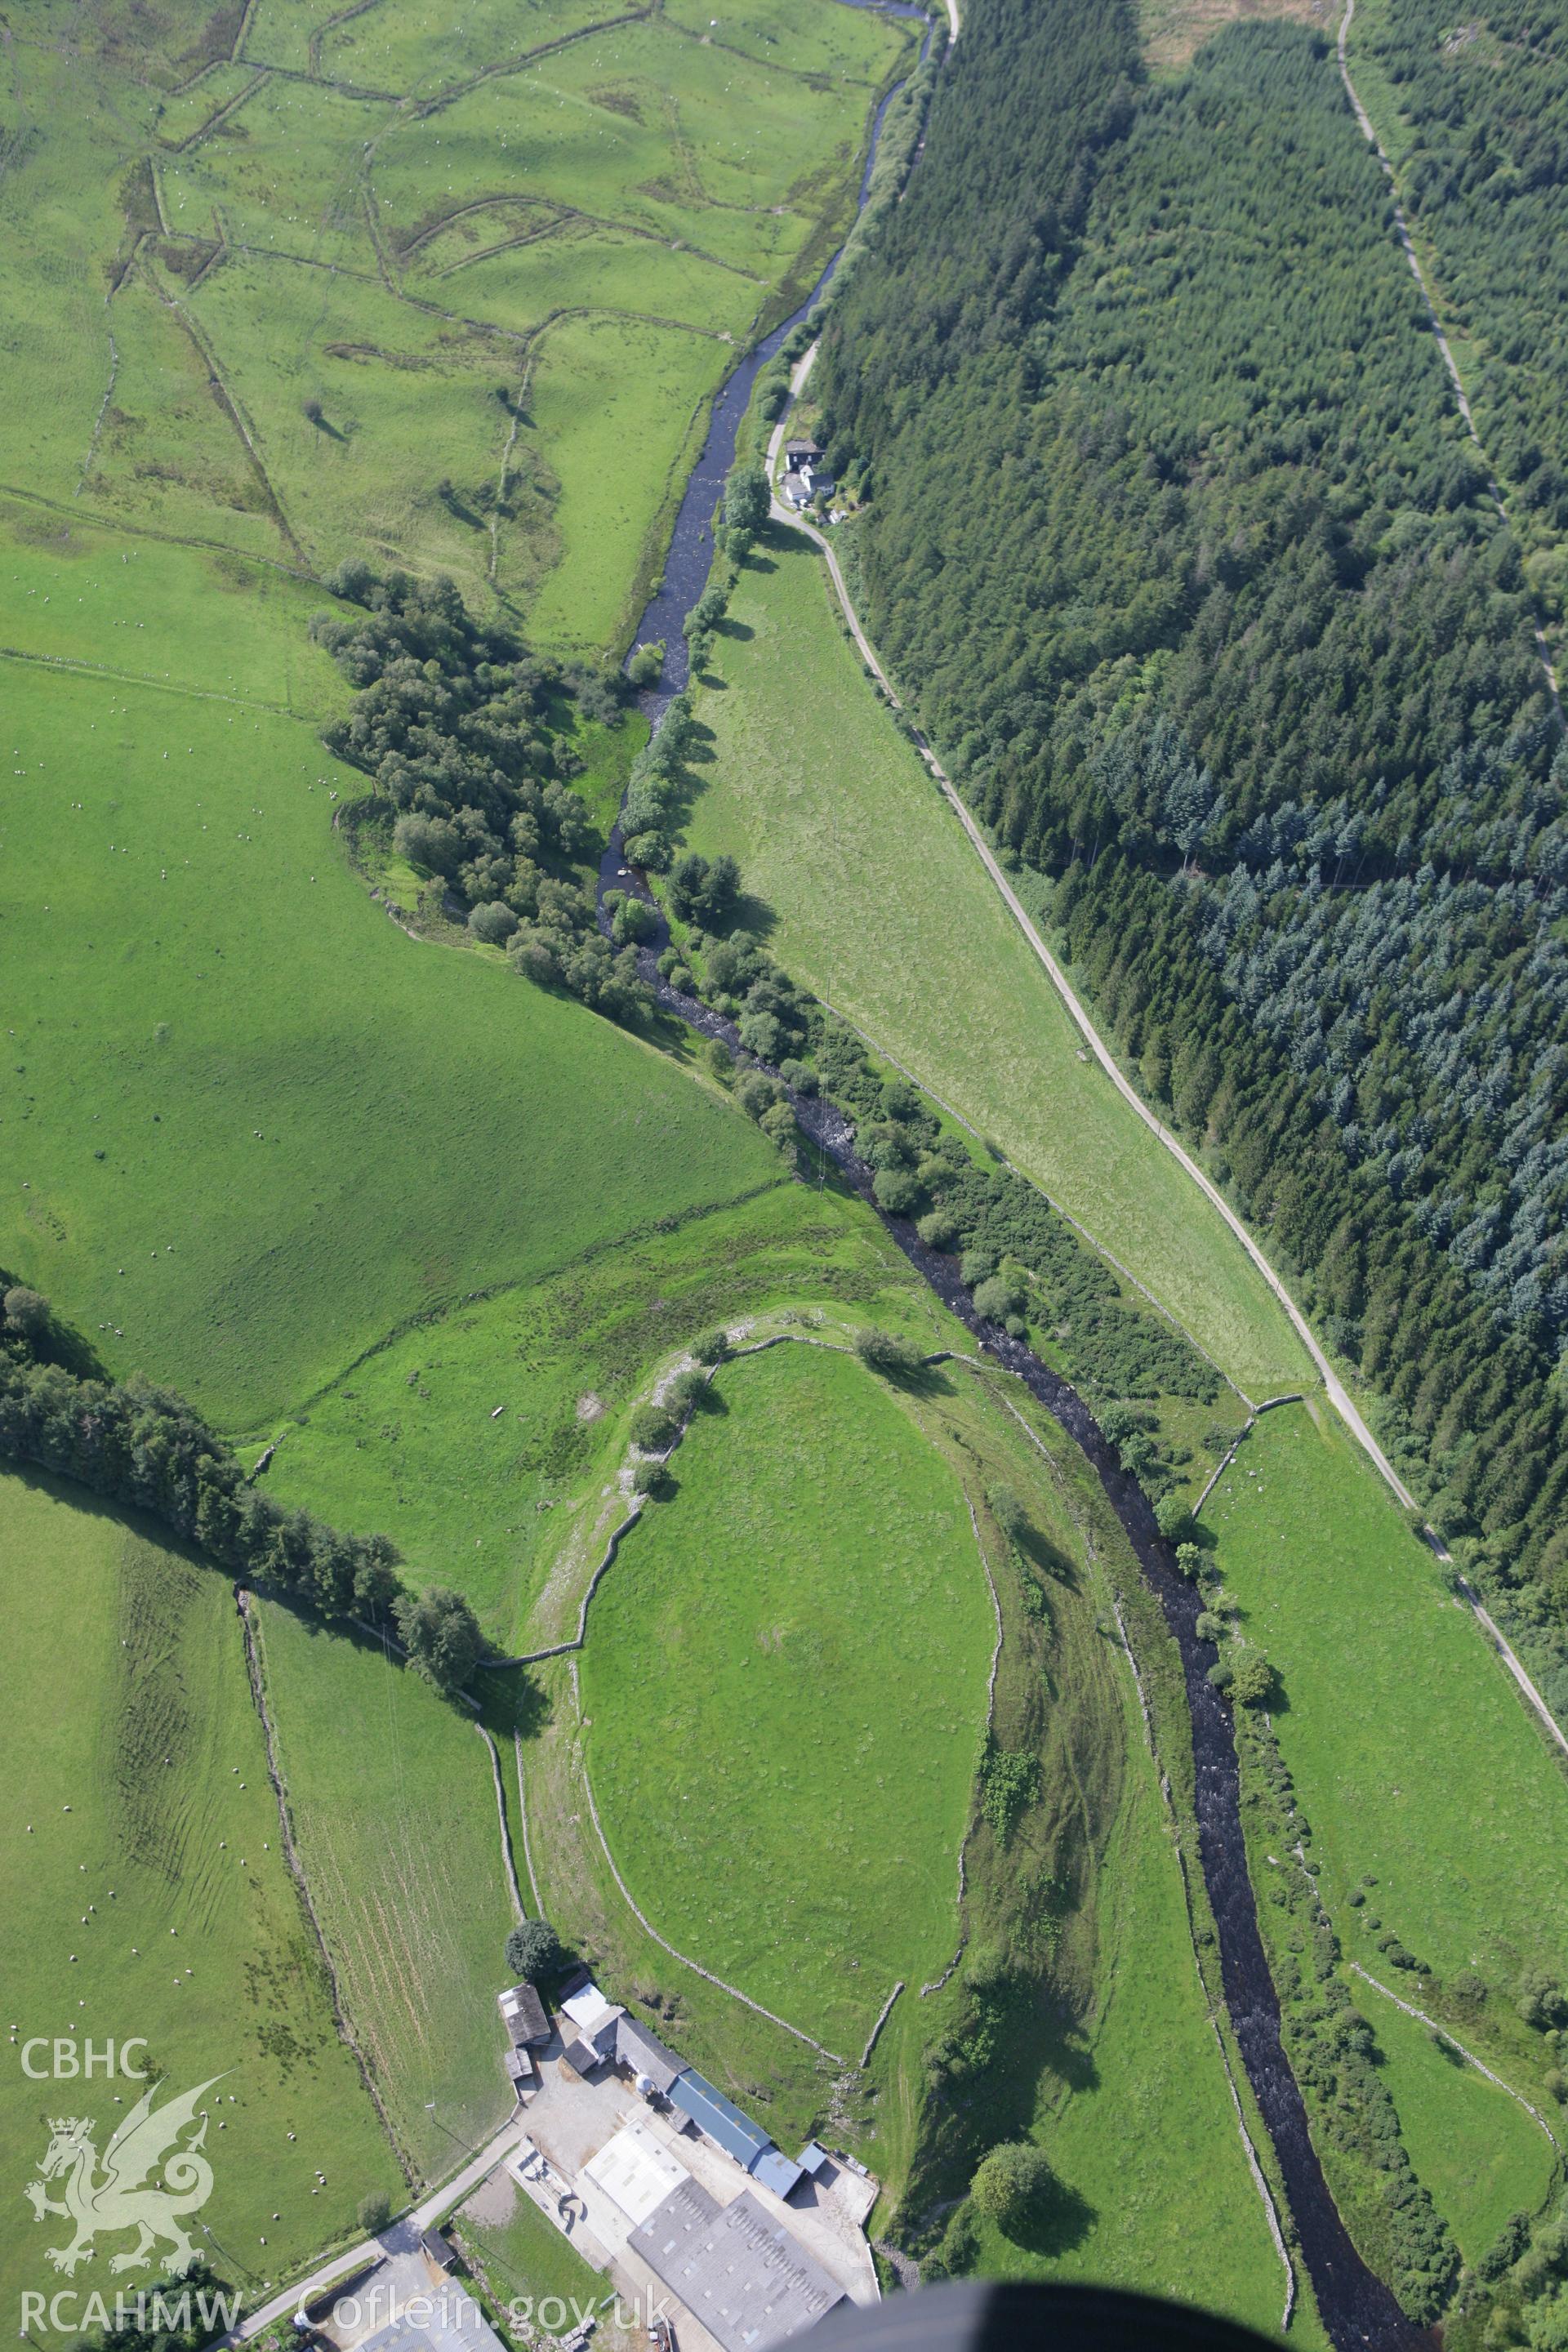 RCAHMW colour oblique aerial photograph of Caer Ddunod. Taken on 31 July 2007 by Toby Driver